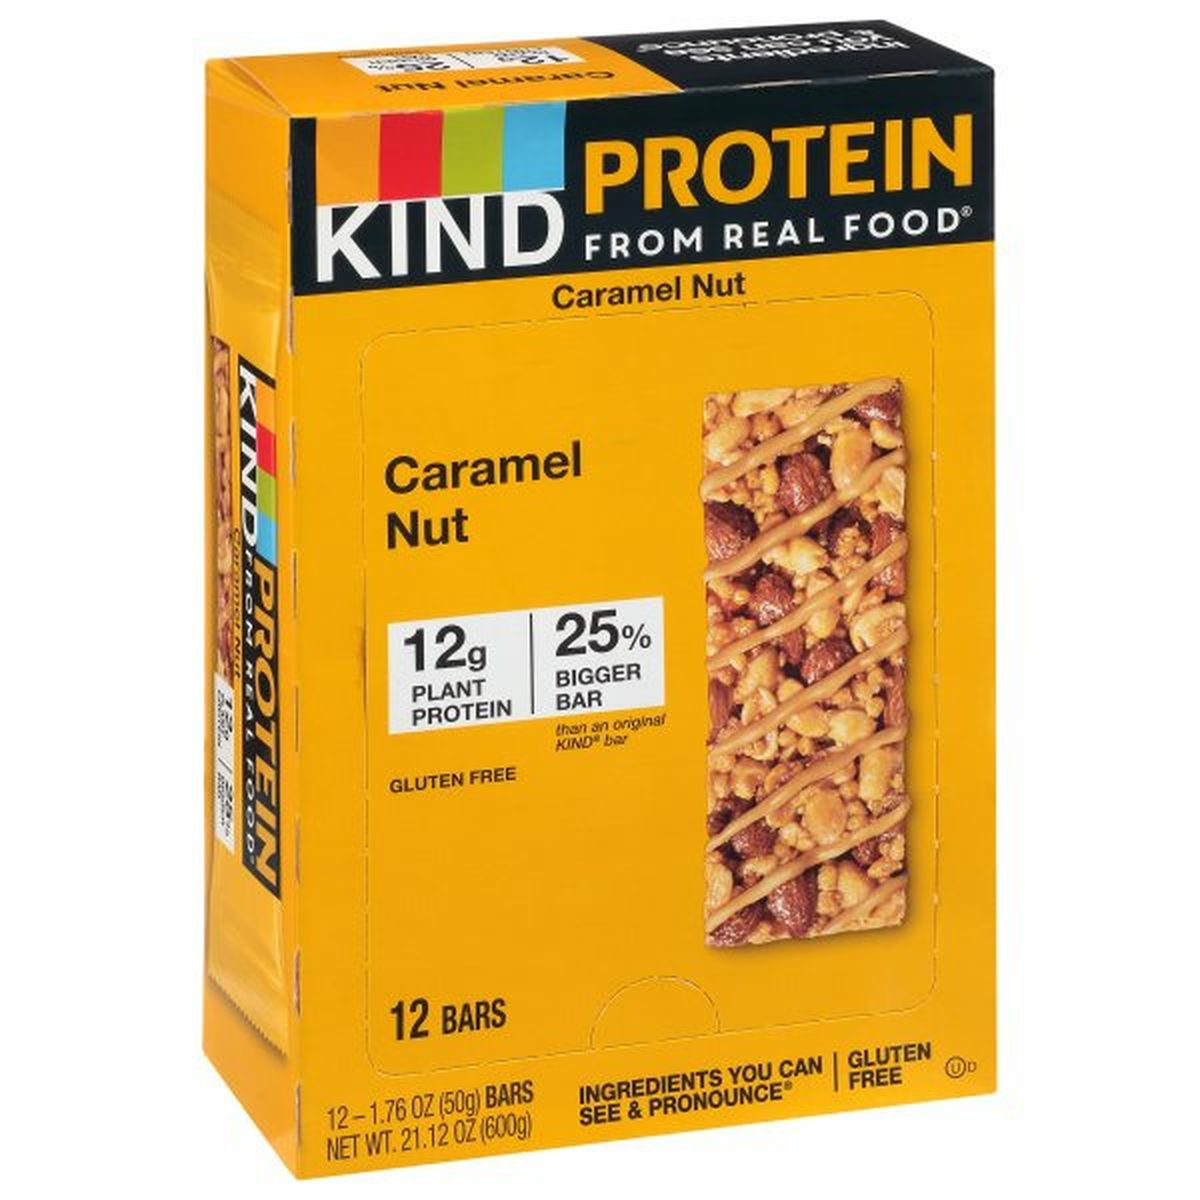 Calories in KIND Protein Bars, Gluten Free, Caramel Nut, 12 Pack